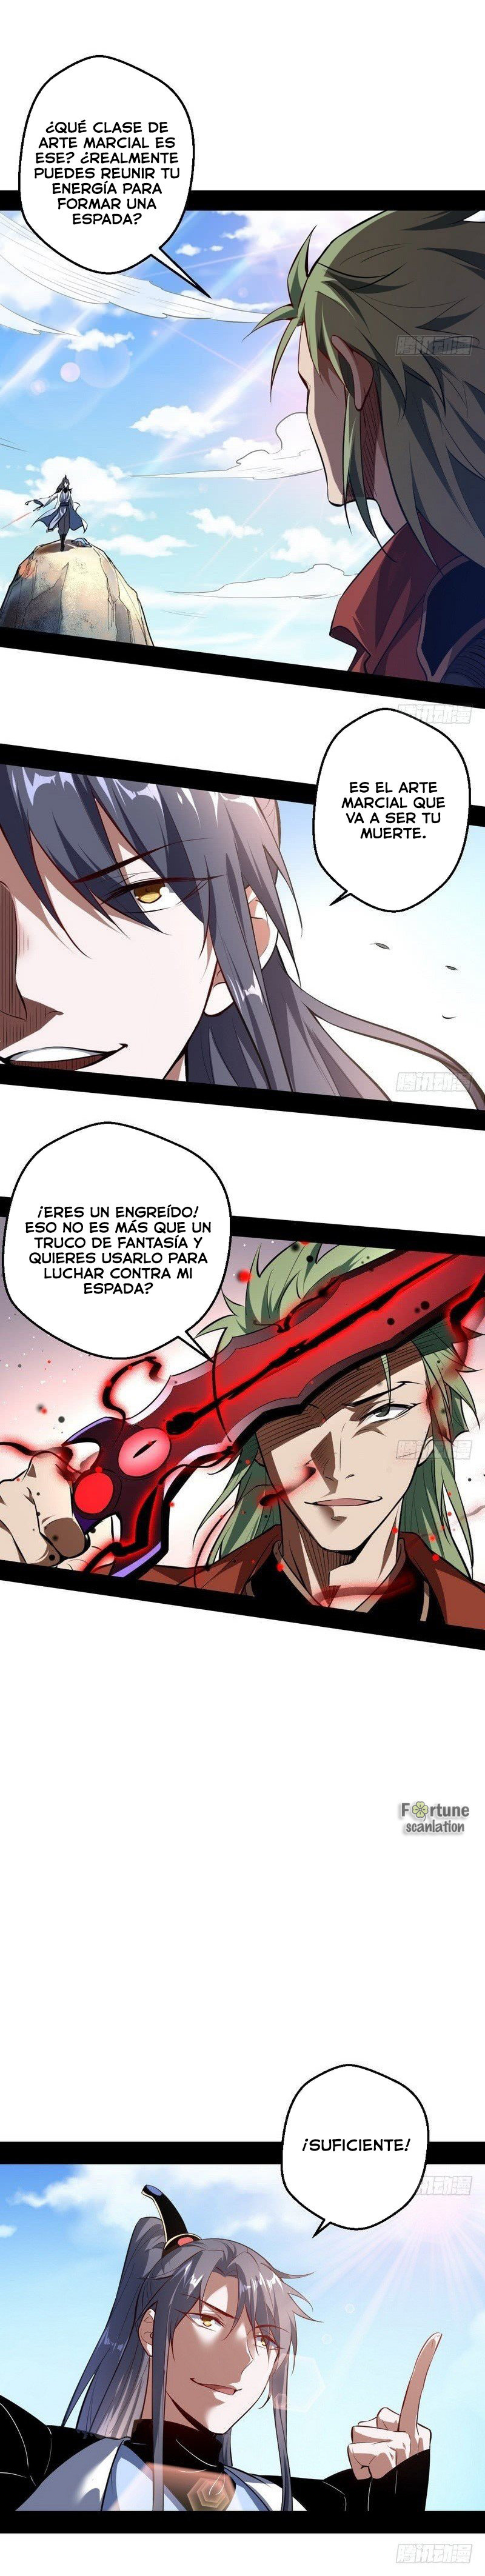 Manga Soy un dios maligno Chapter 36 image number 3